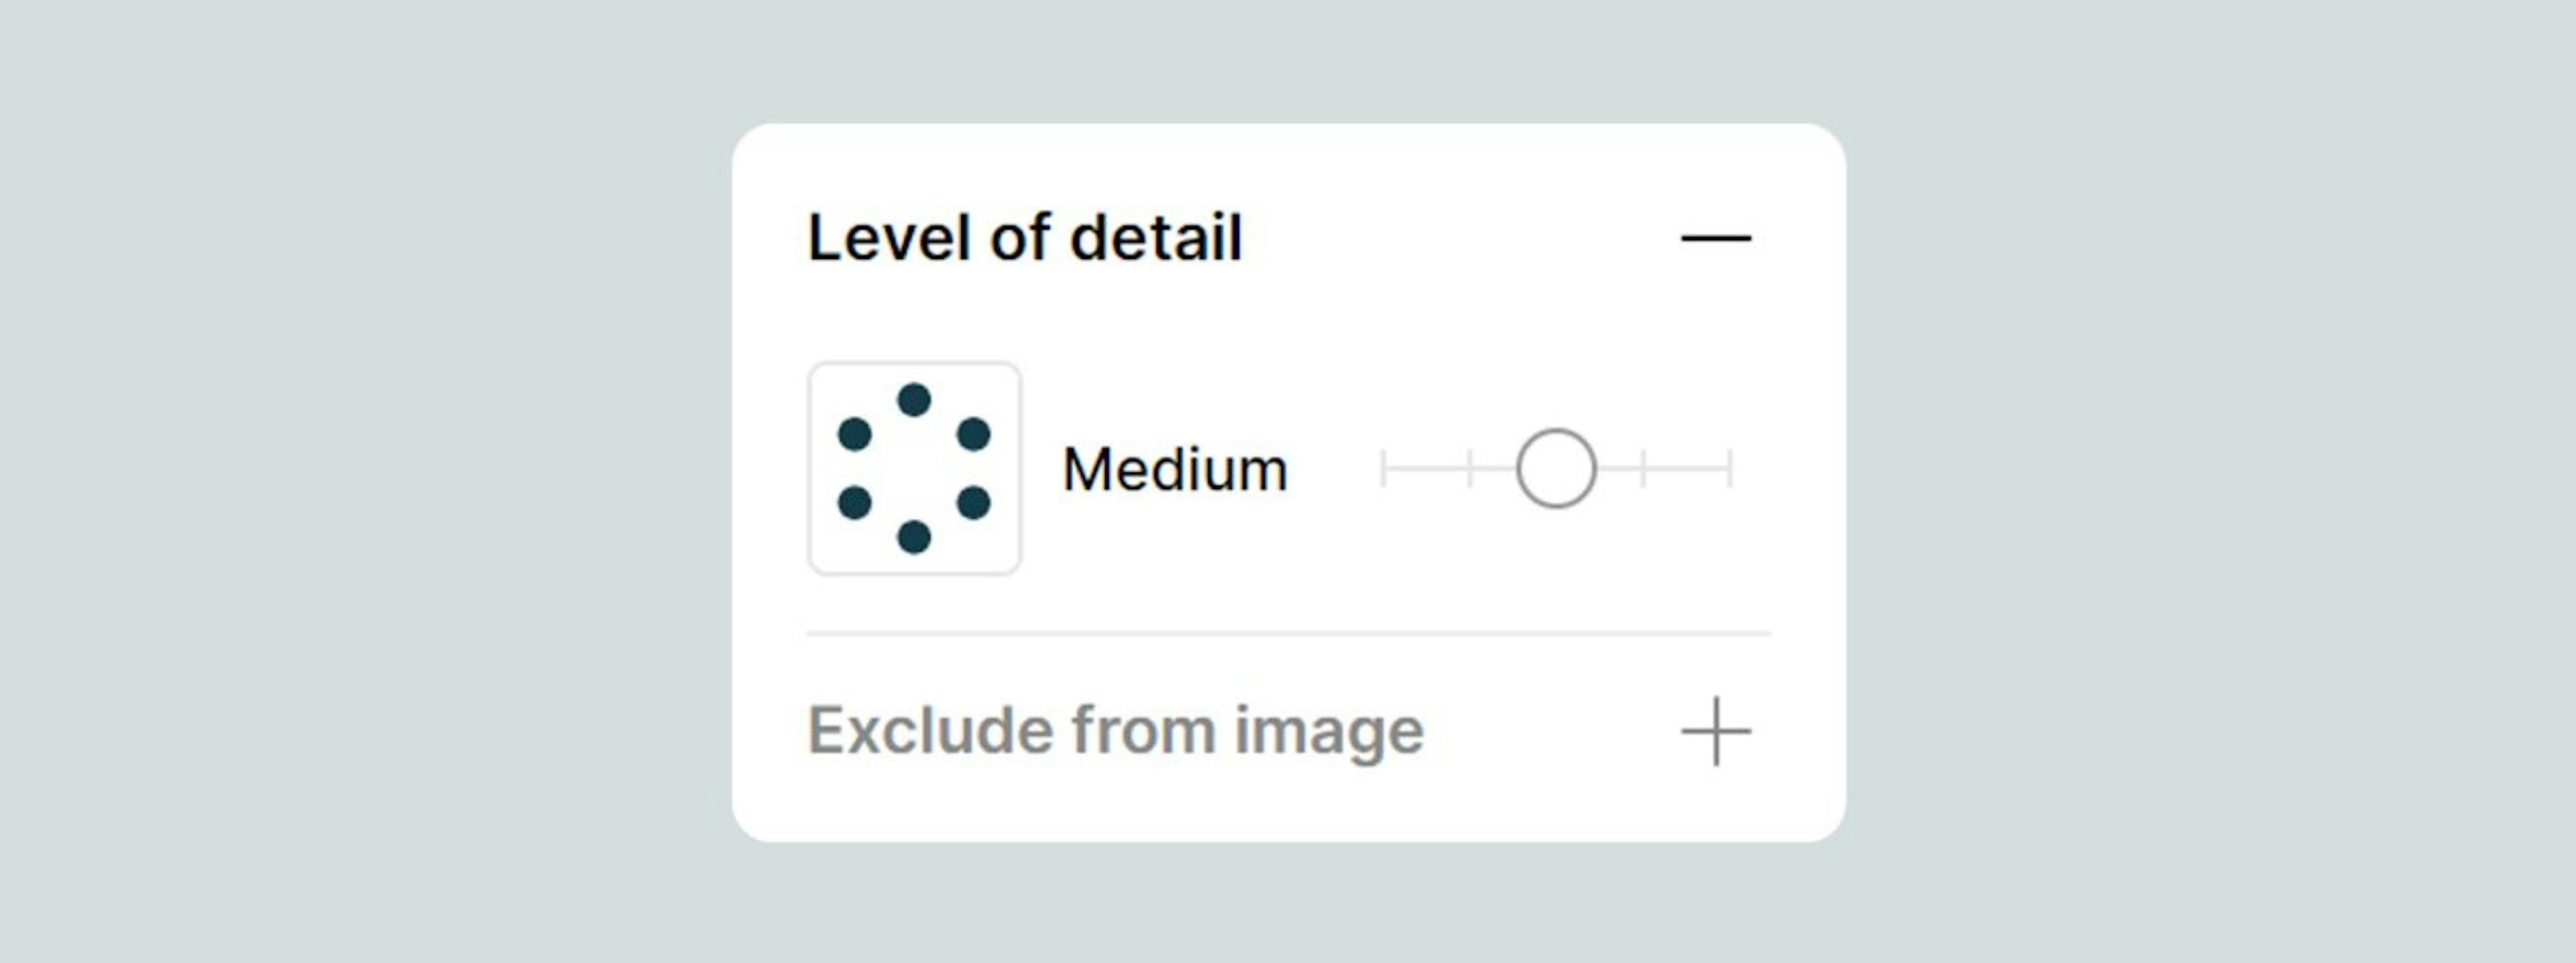 App for generating graphic assets Recraft uses criteria slider for setting up the output level of details